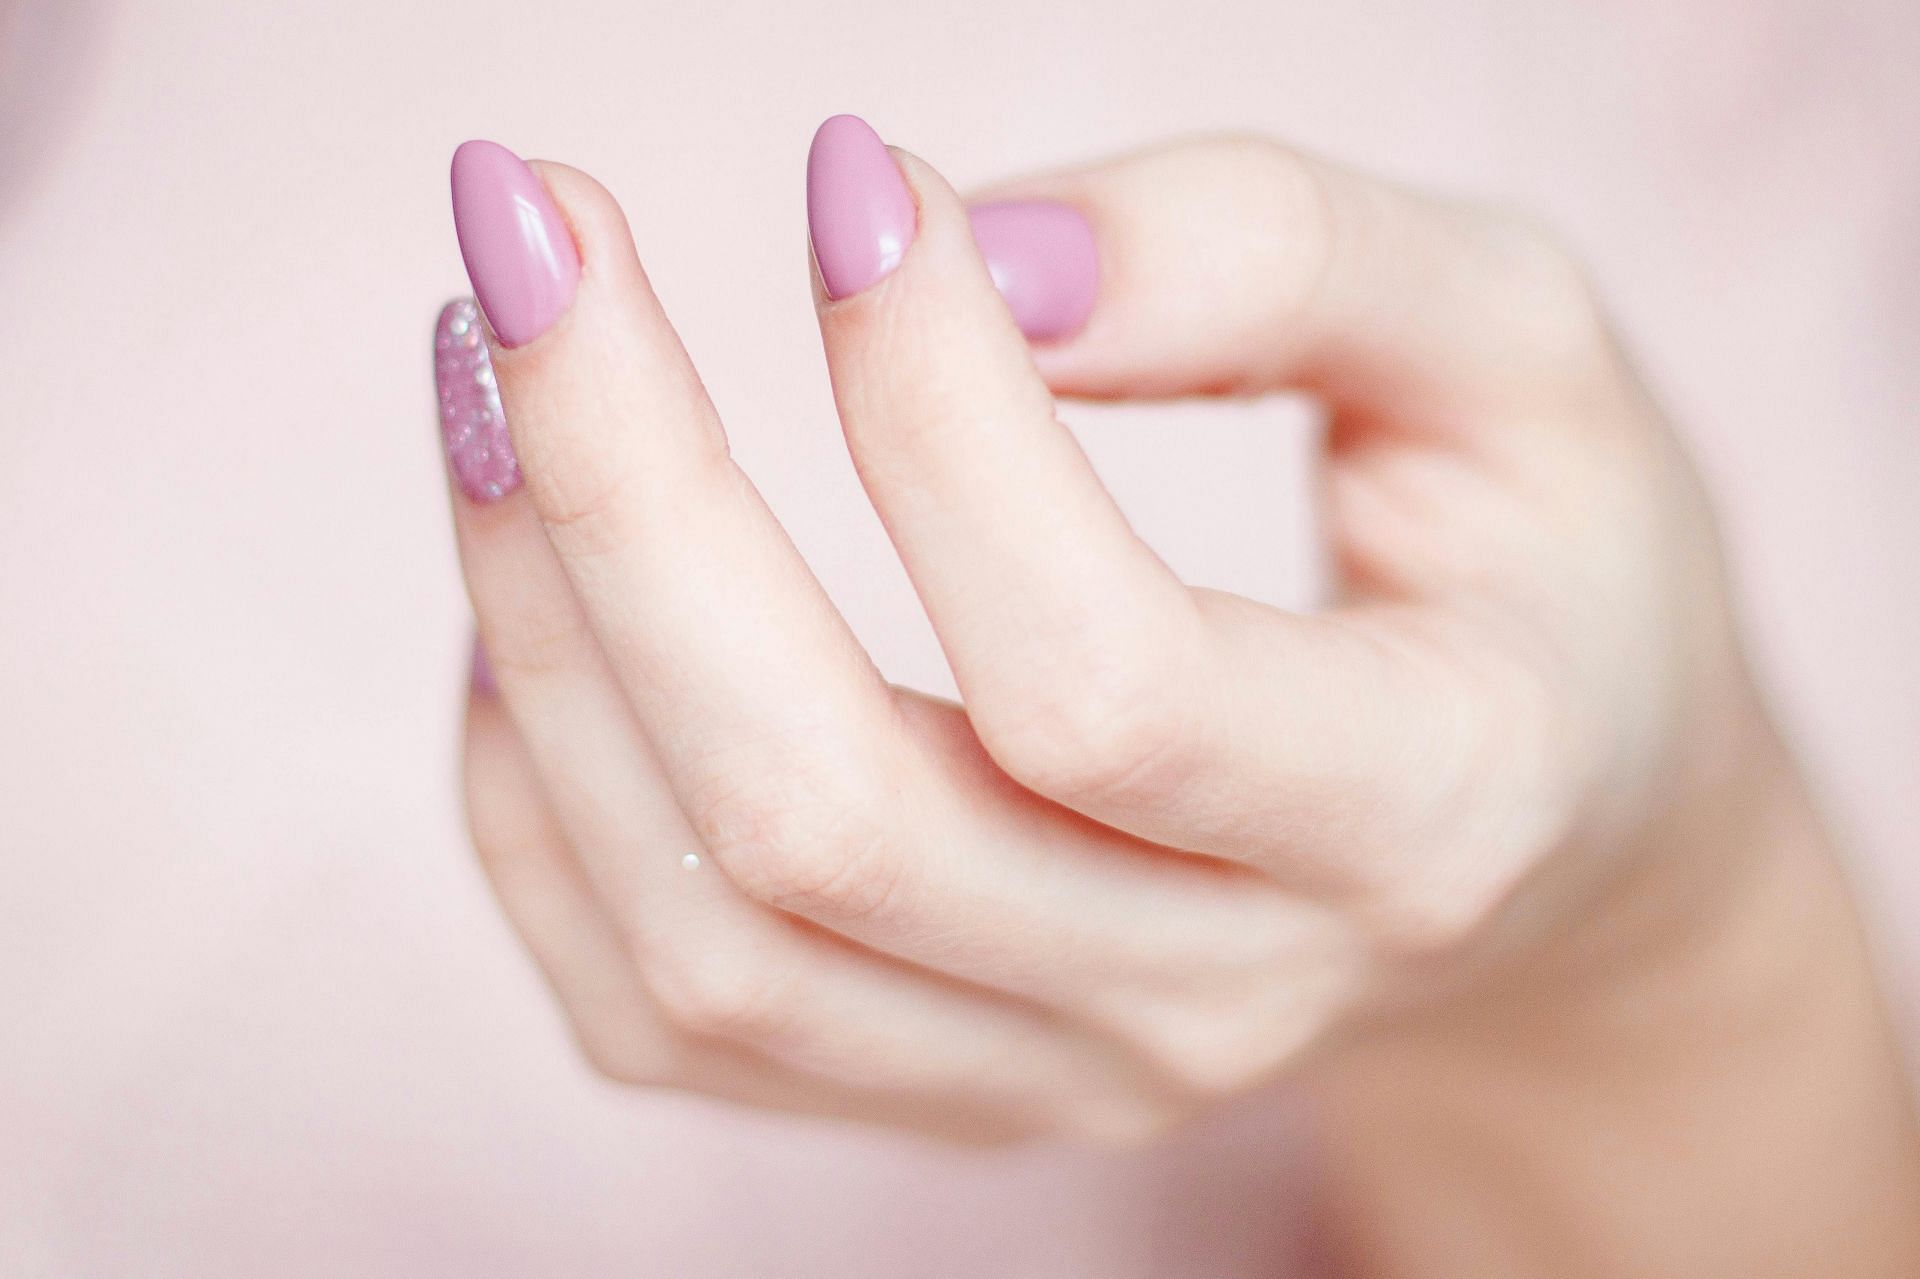 tips to stop picking nails (image sourced via Pexels / Photo by valeria)